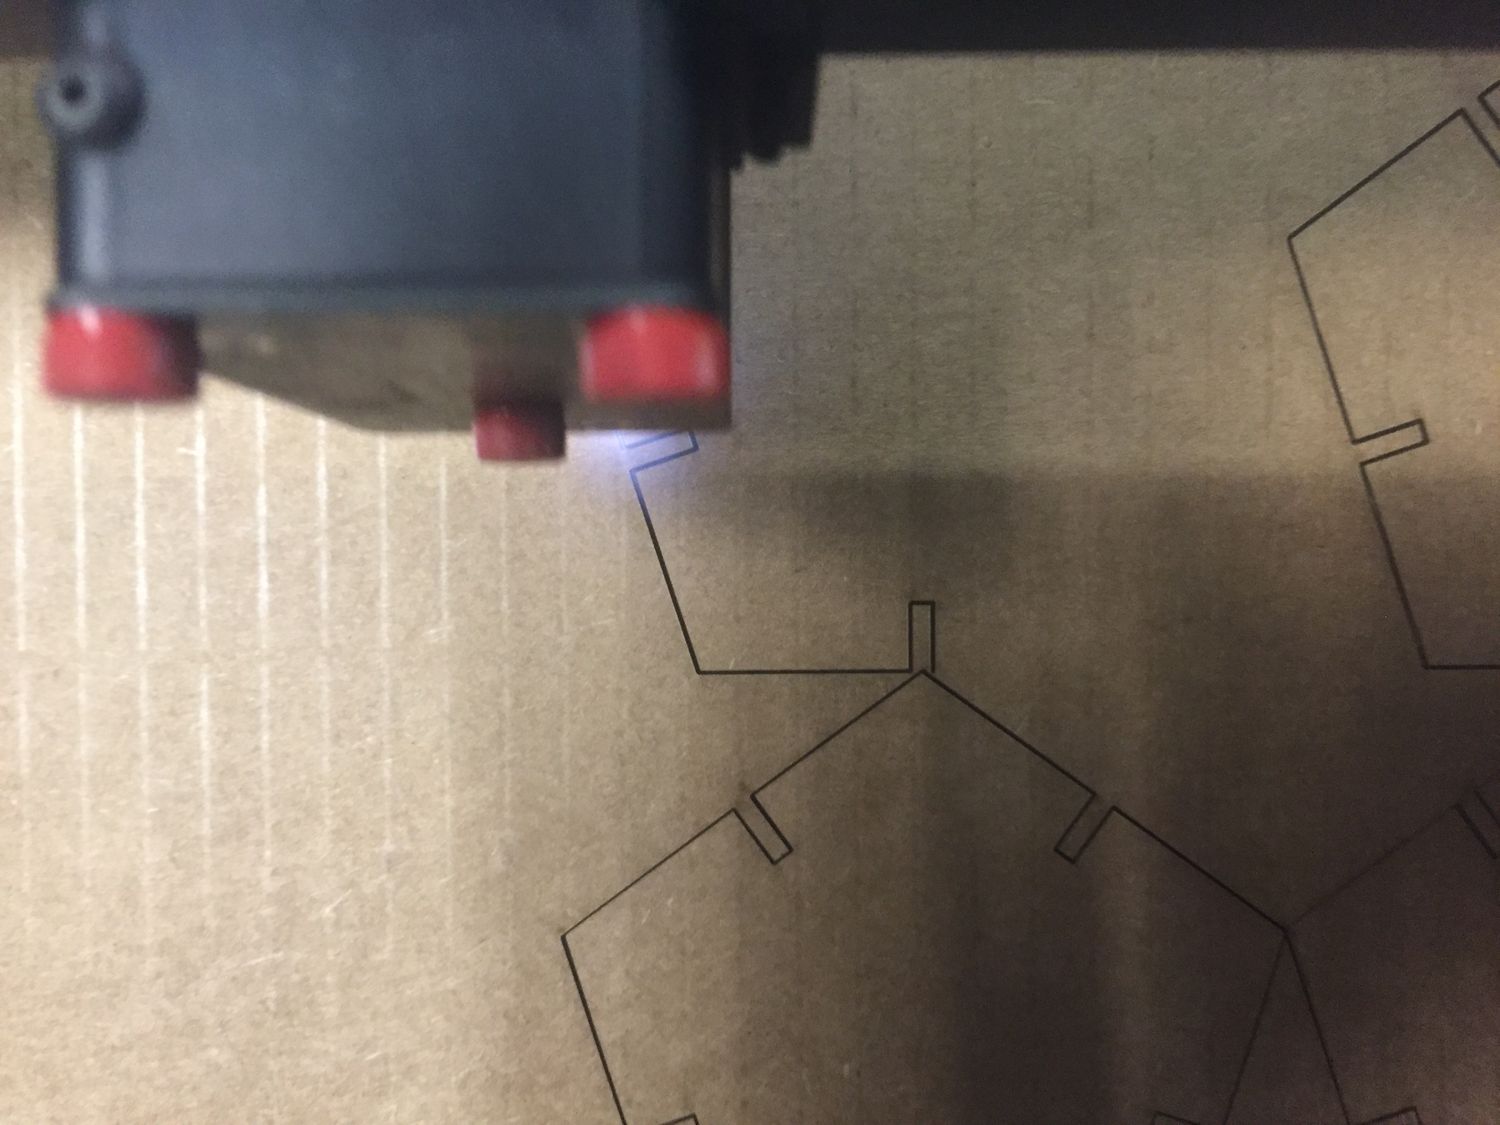 The grey head of laser cutter with red screws is making a line on a piece of cardboard